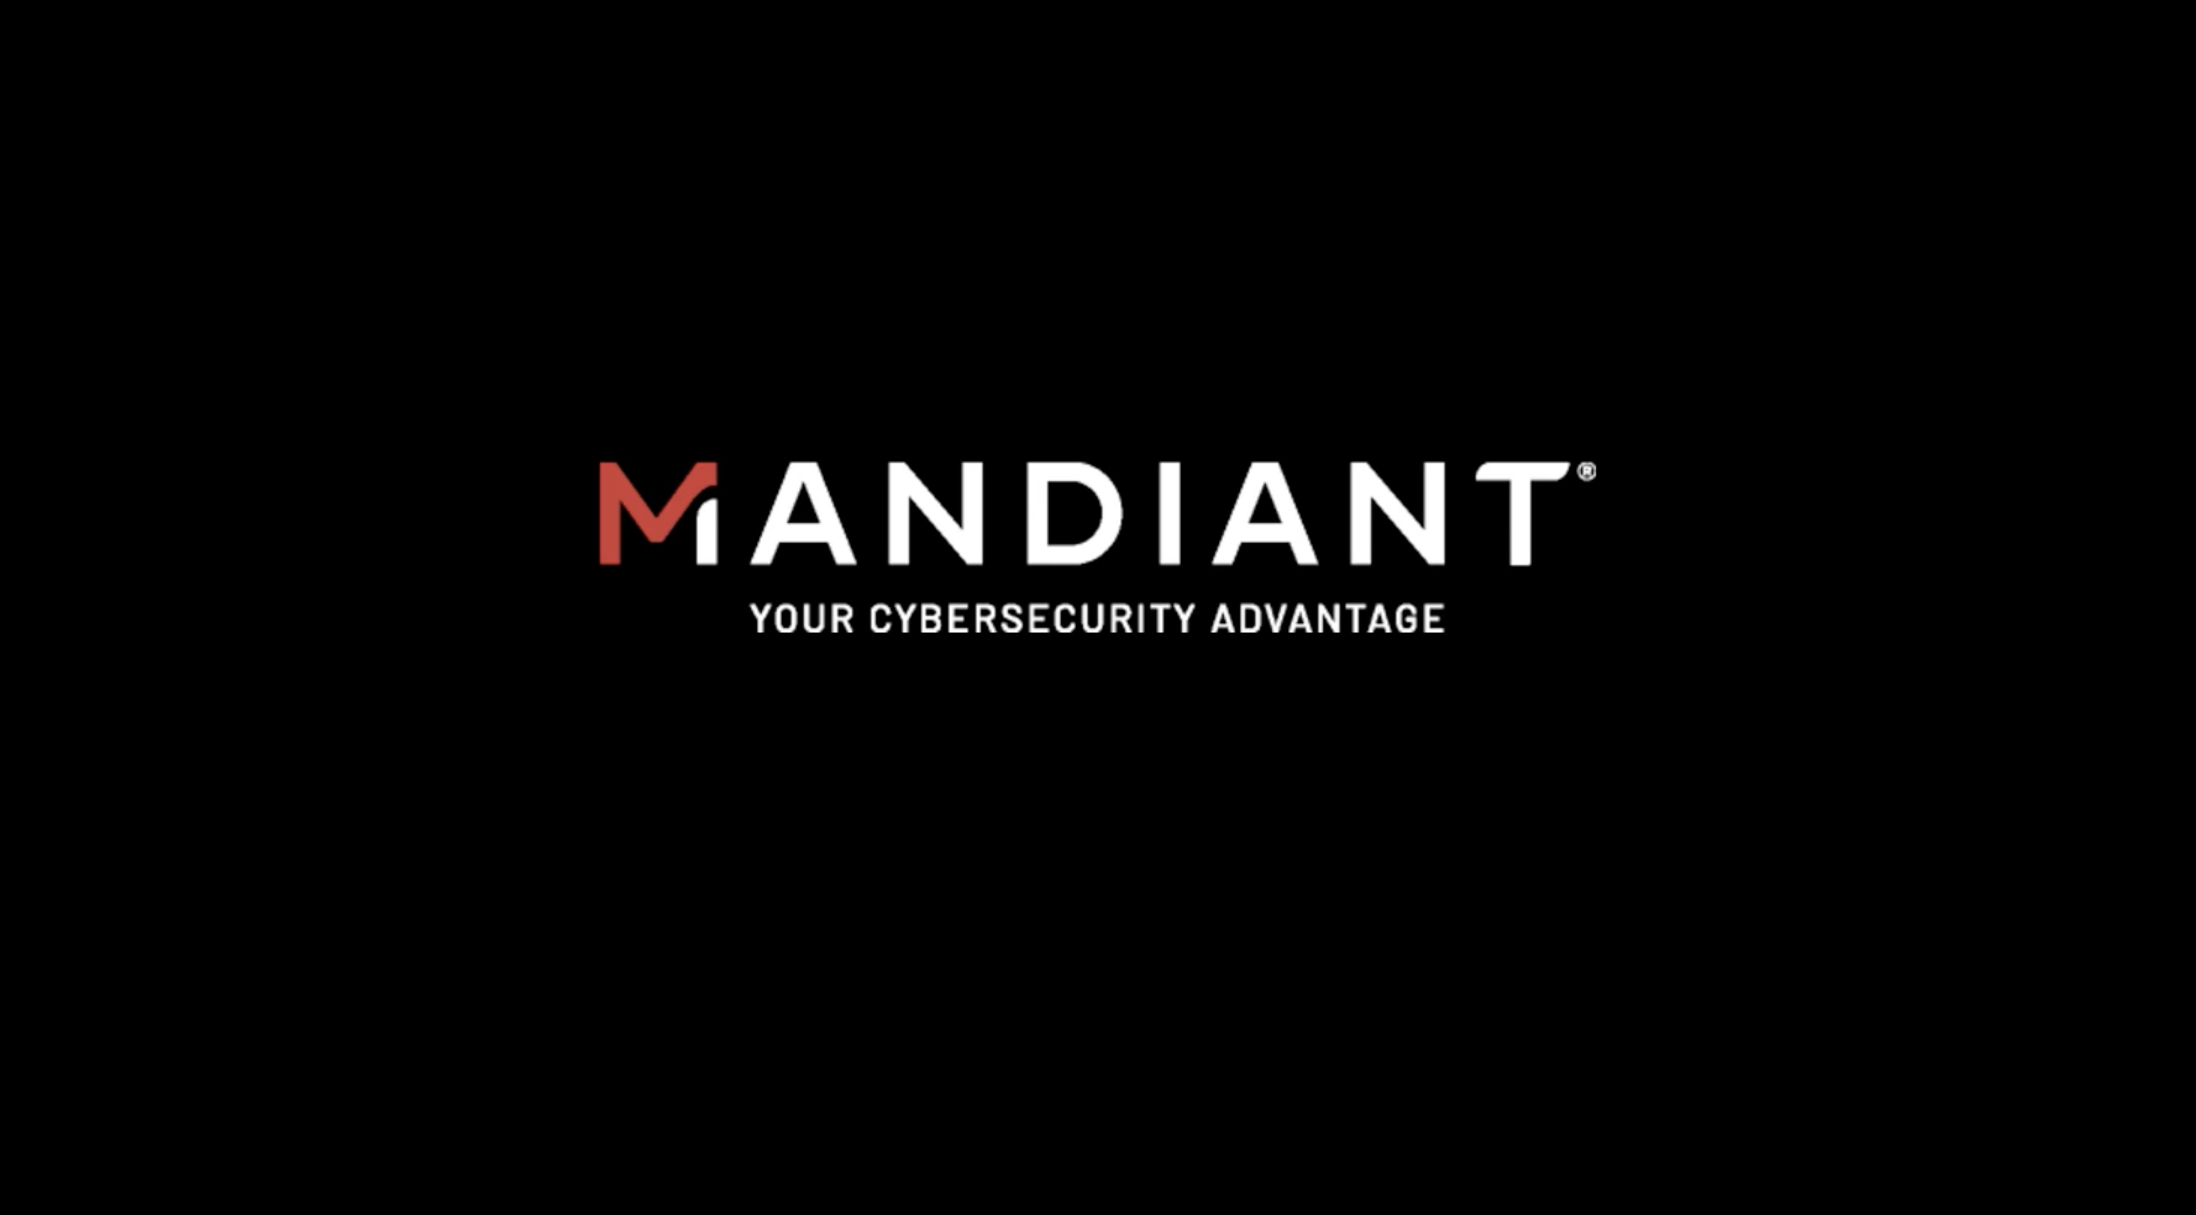 Stay Relentless against cyber threats with Mandiant